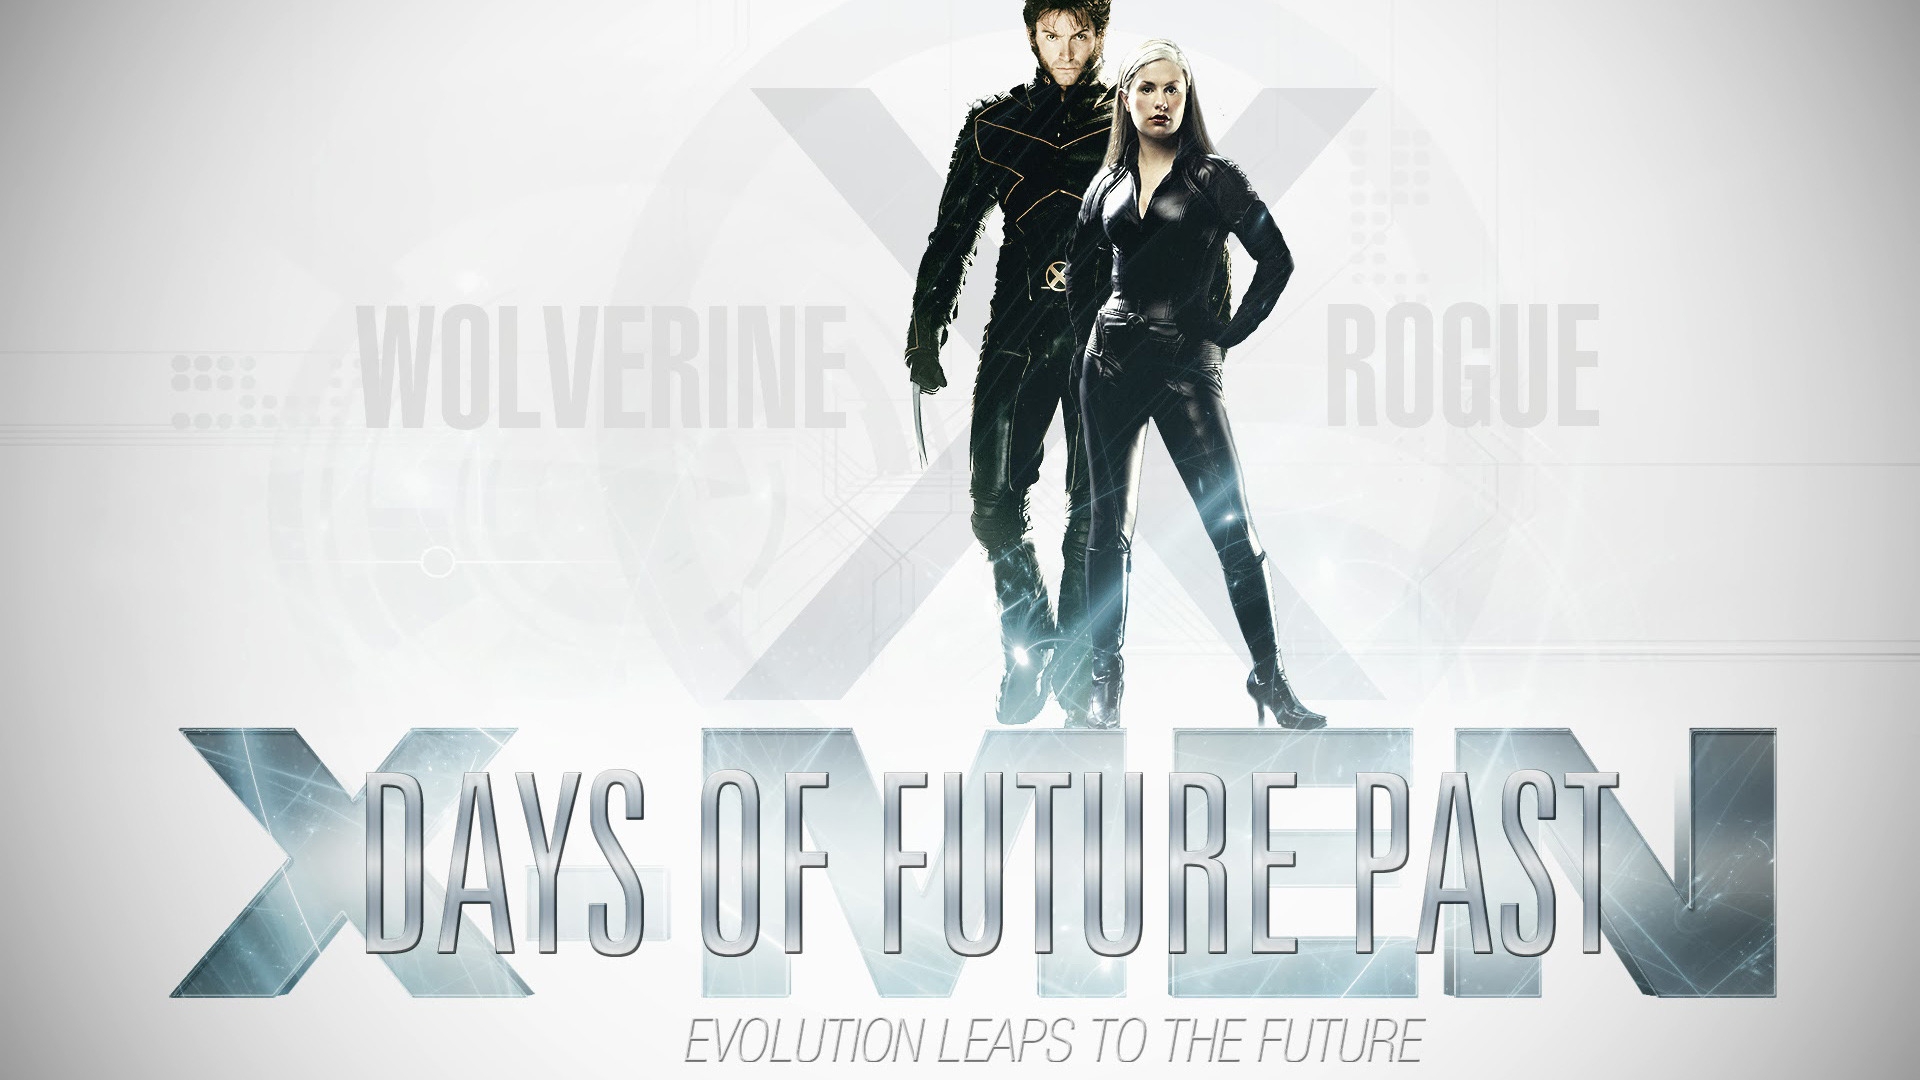 X-Men Days of Future Past for 1920 x 1080 HDTV 1080p resolution